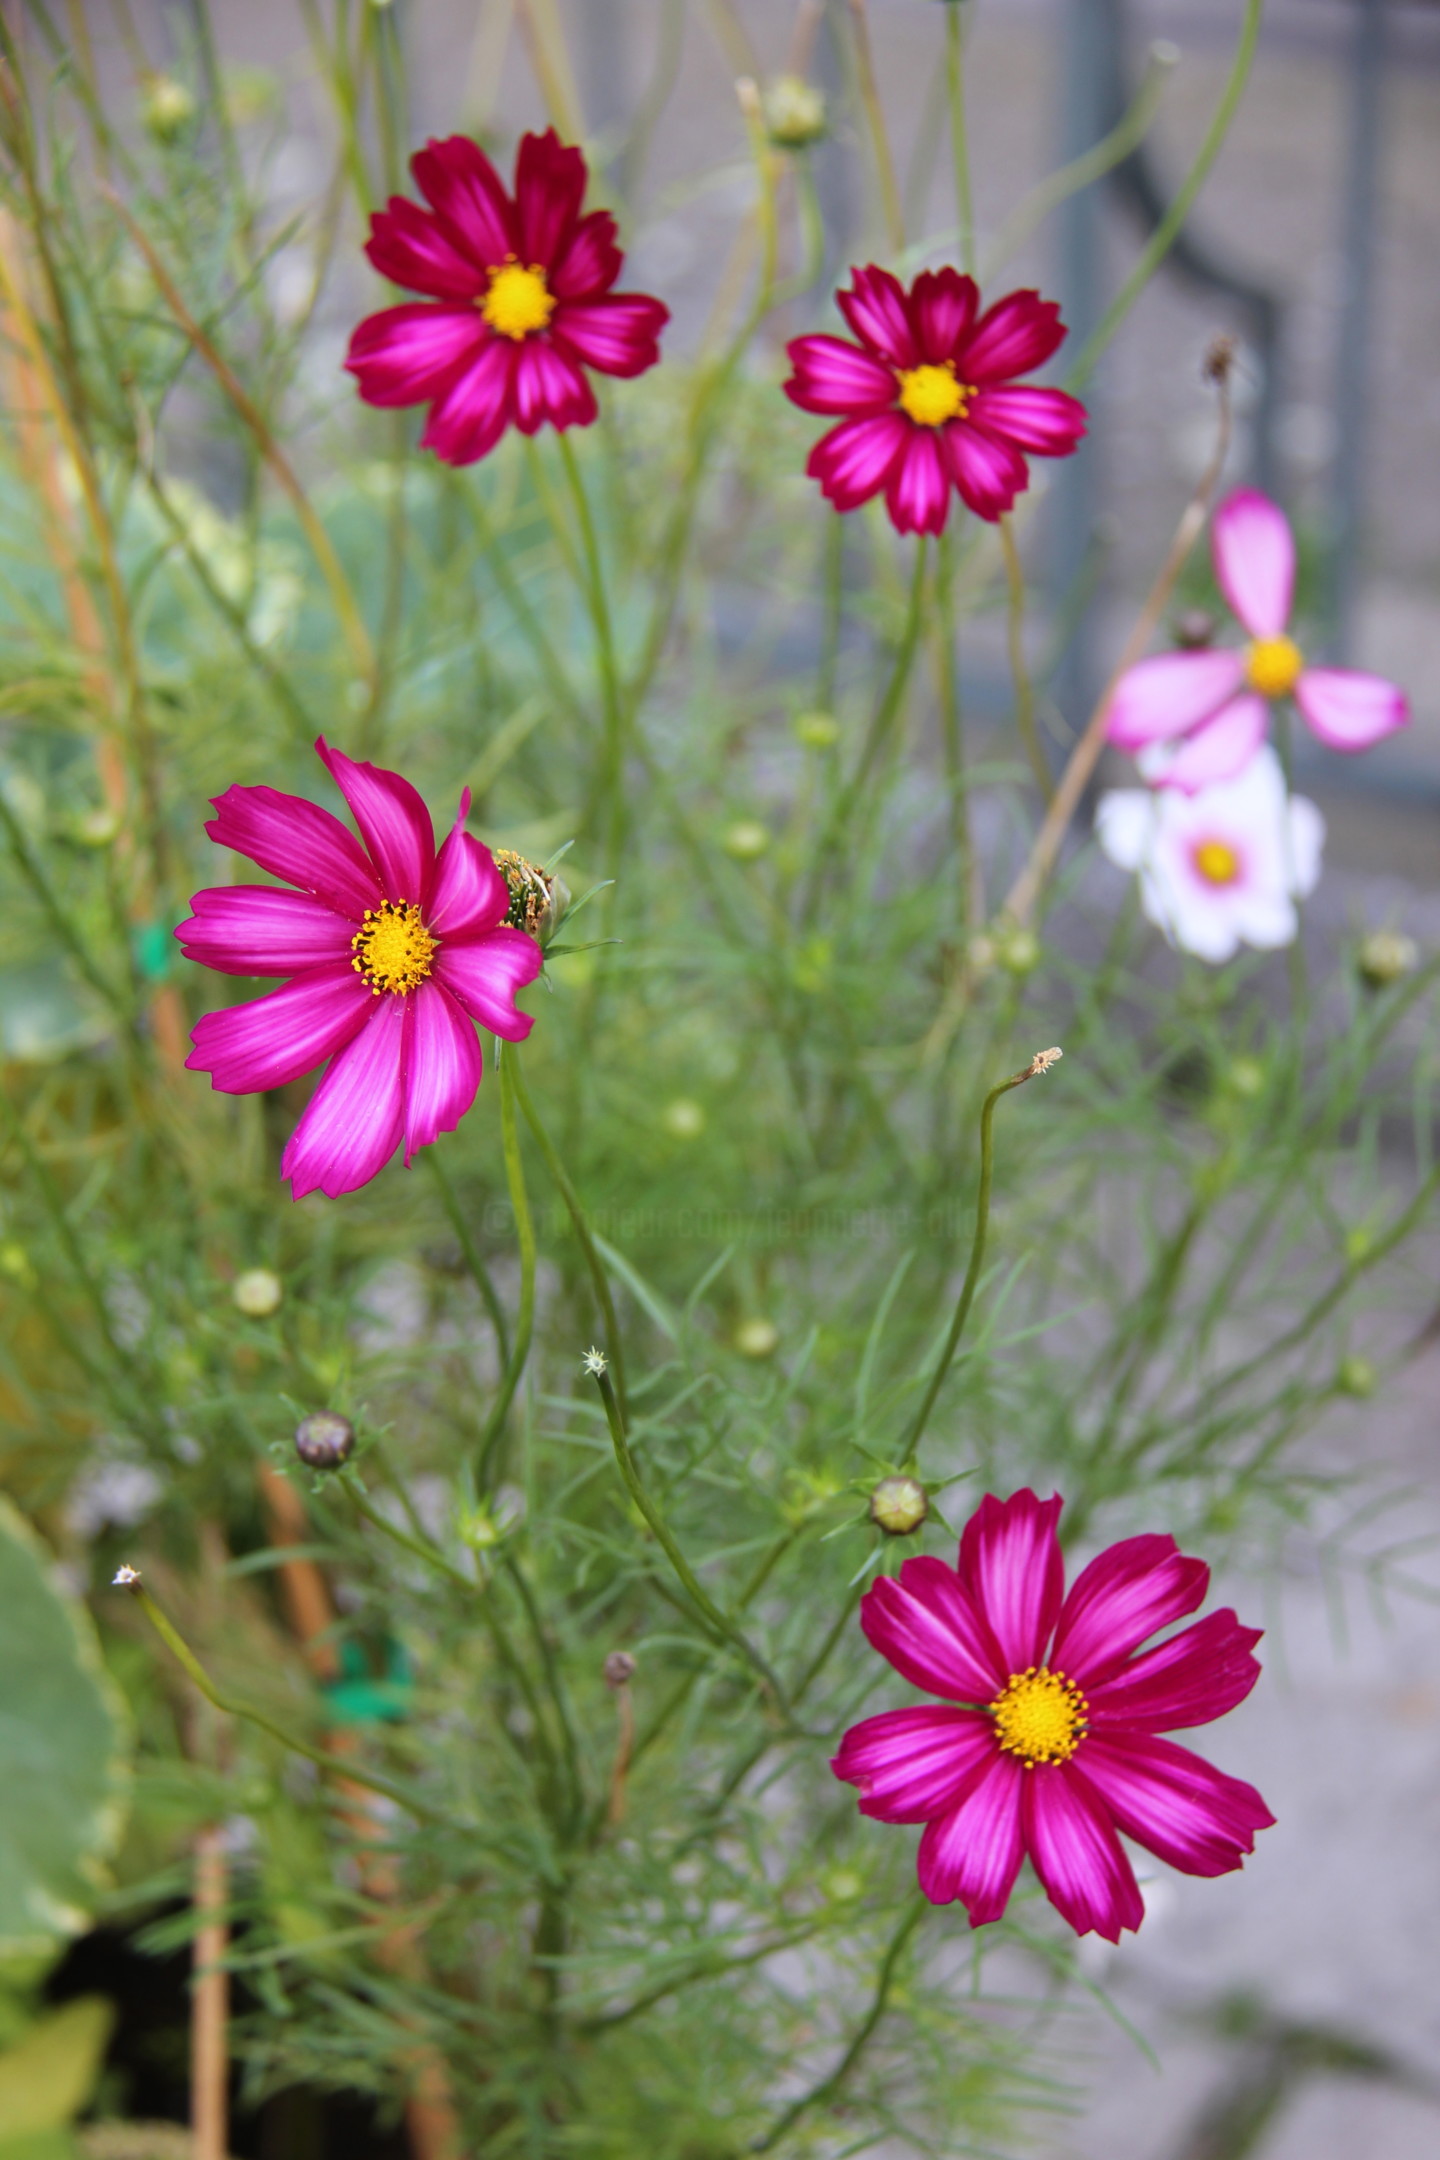 Cosmos (Fleurs), Photography by Jeannette Allary | Artmajeur